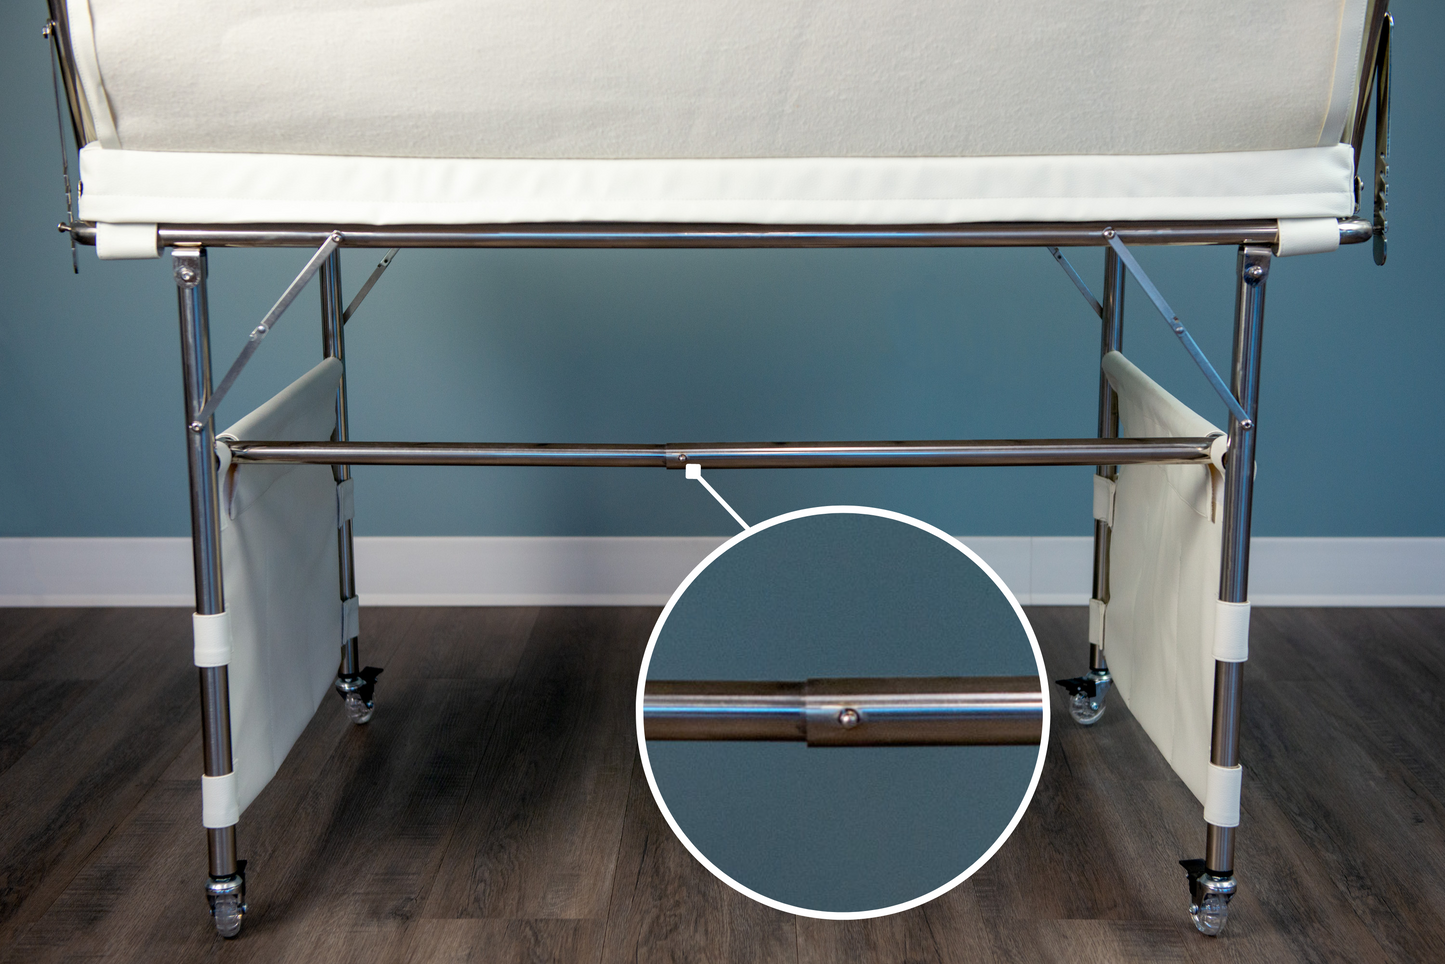 The Easy Table represents the next generation of backdrop stands for newborn photography, featuring tool-free assembly, a built-in safety bar, and secure positioning with a single click.